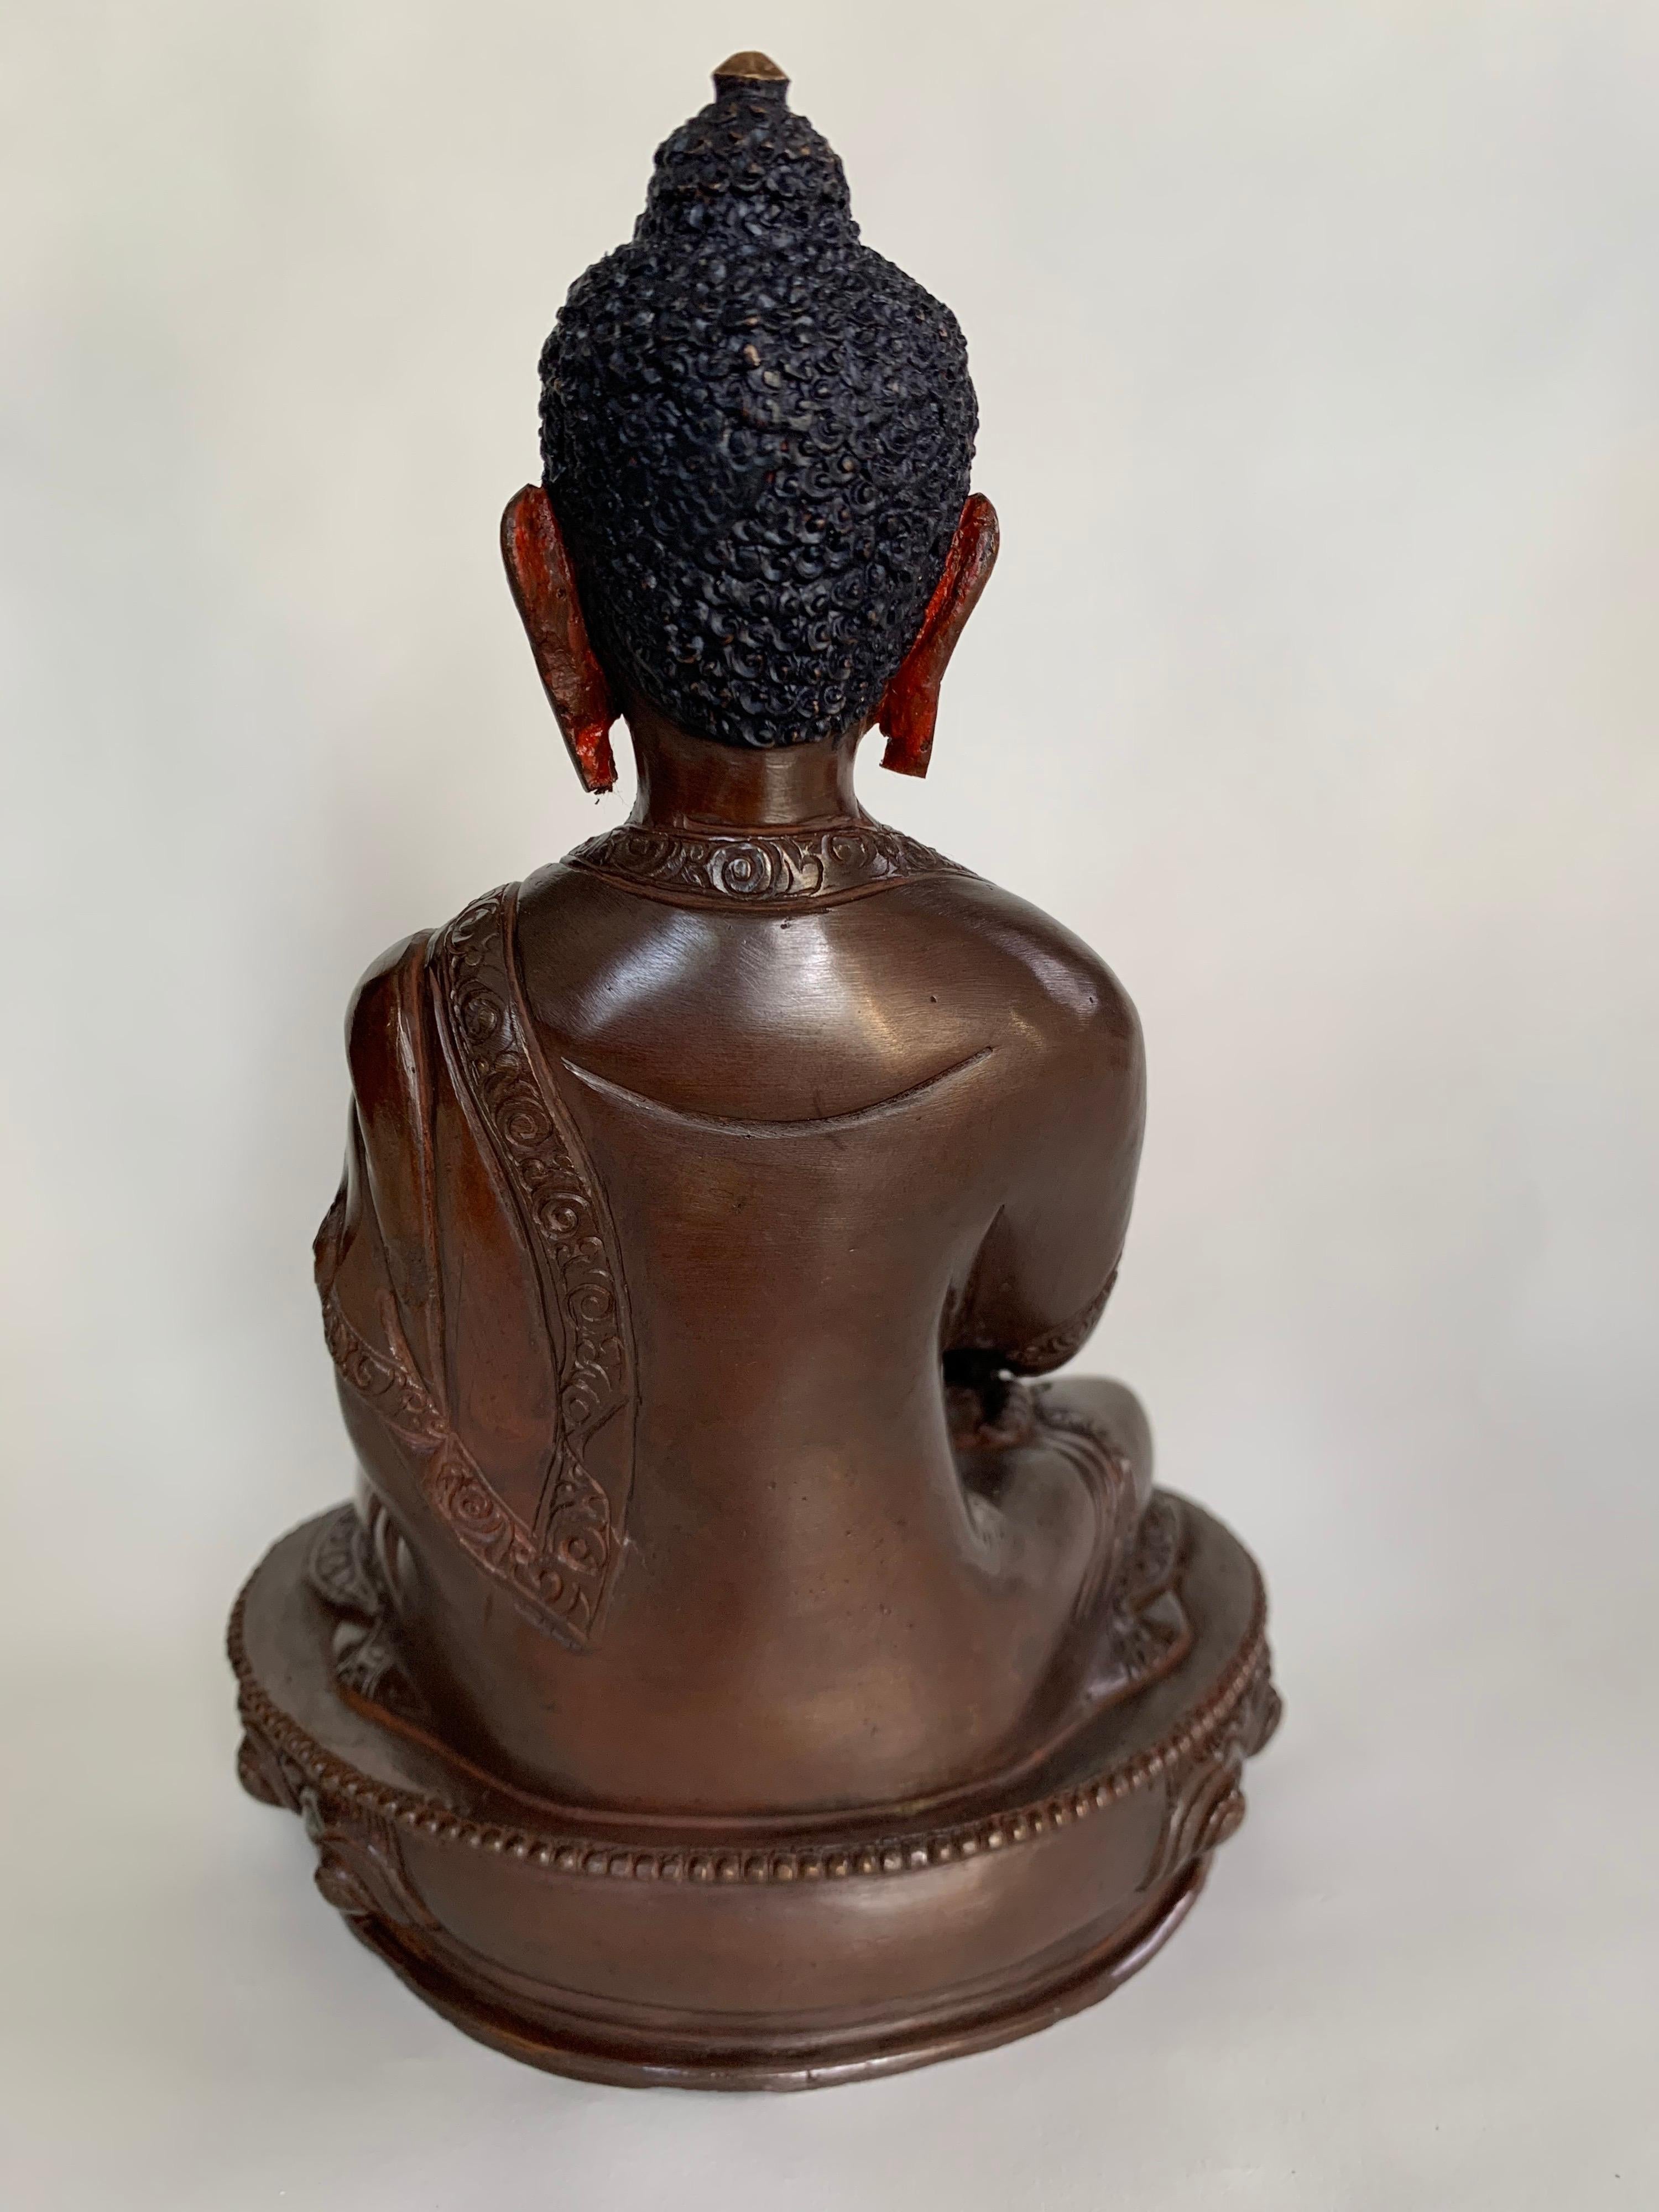 Buddha Statue 7.5 Inch Handcrafted by Lost Wax Process - Gray Figurative Sculpture by Unknown